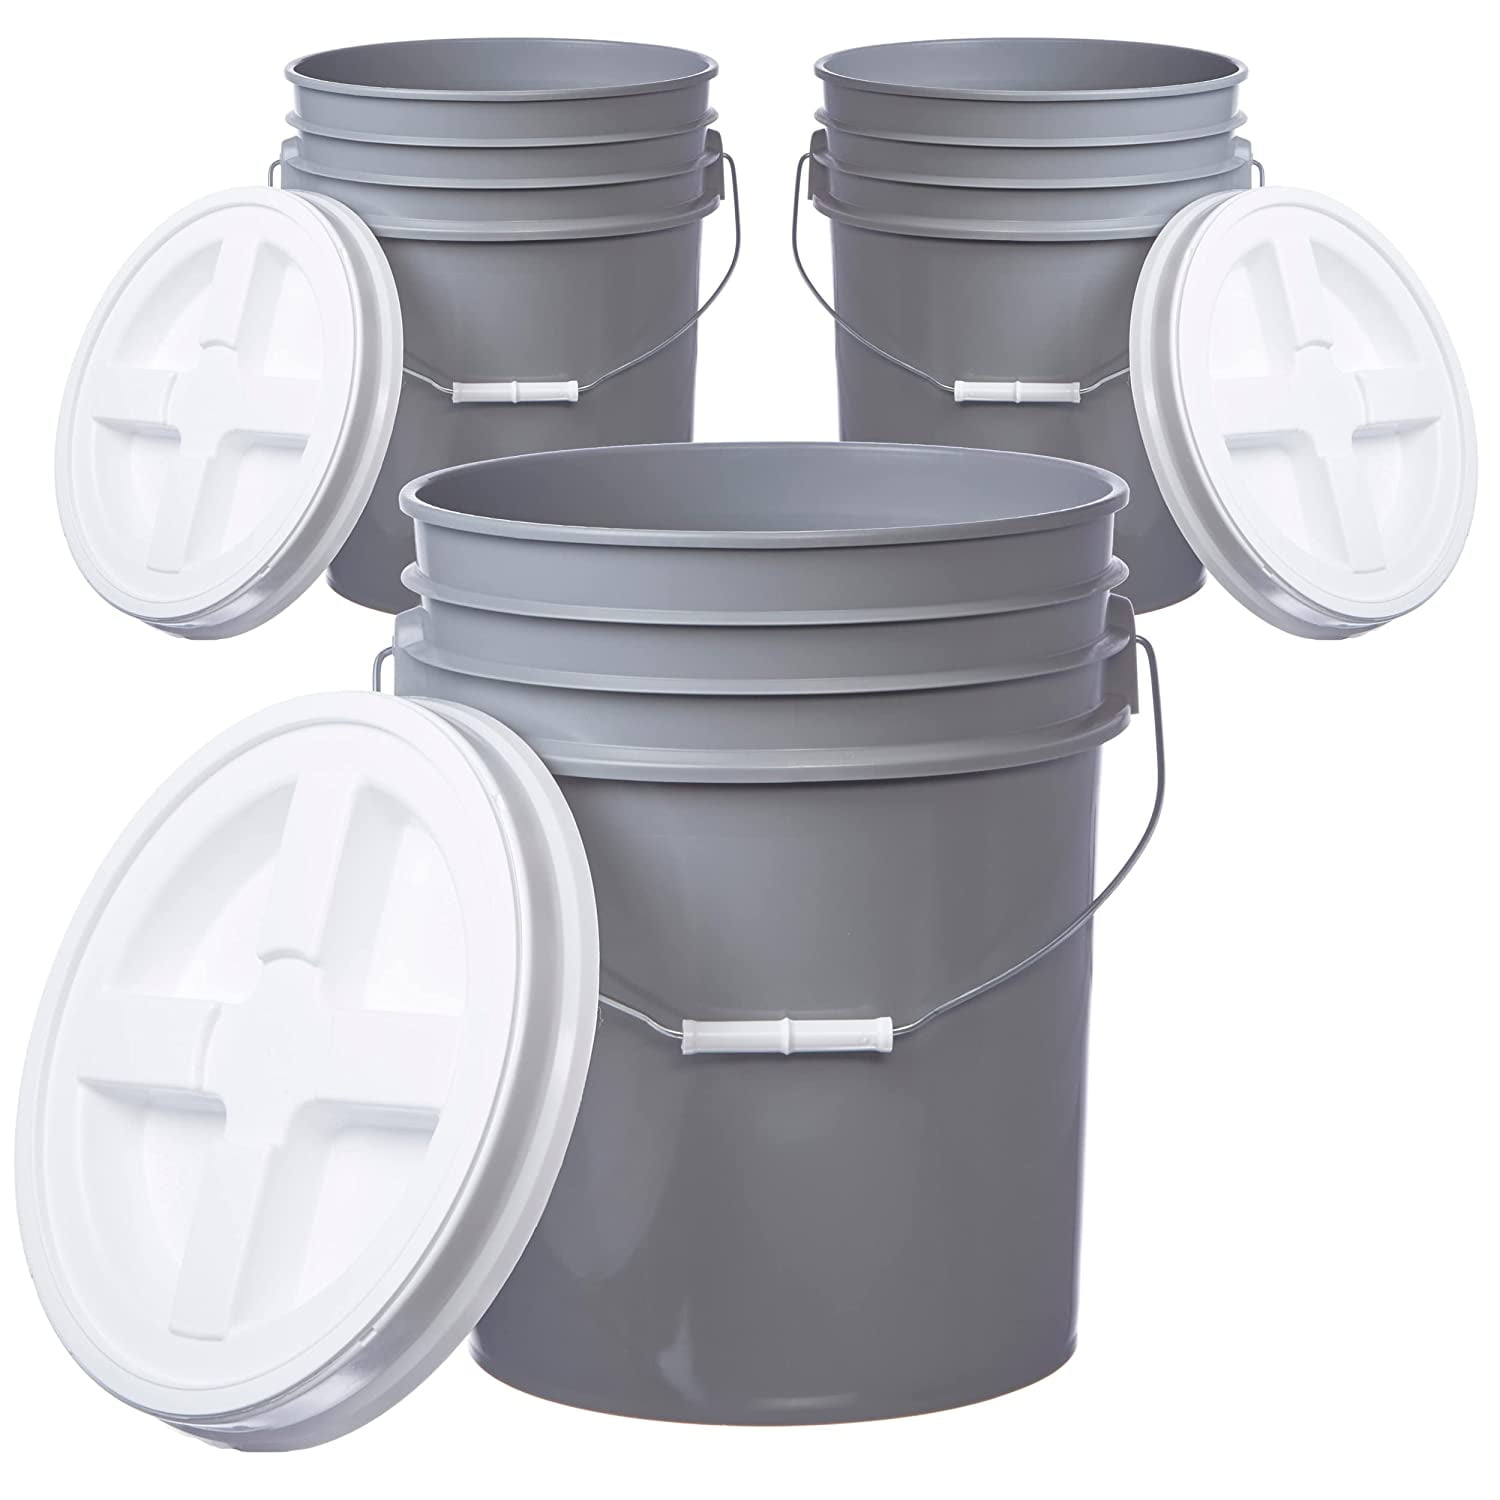 5 Gallon Water Bucket with Lid, Yelm Farm and Pet